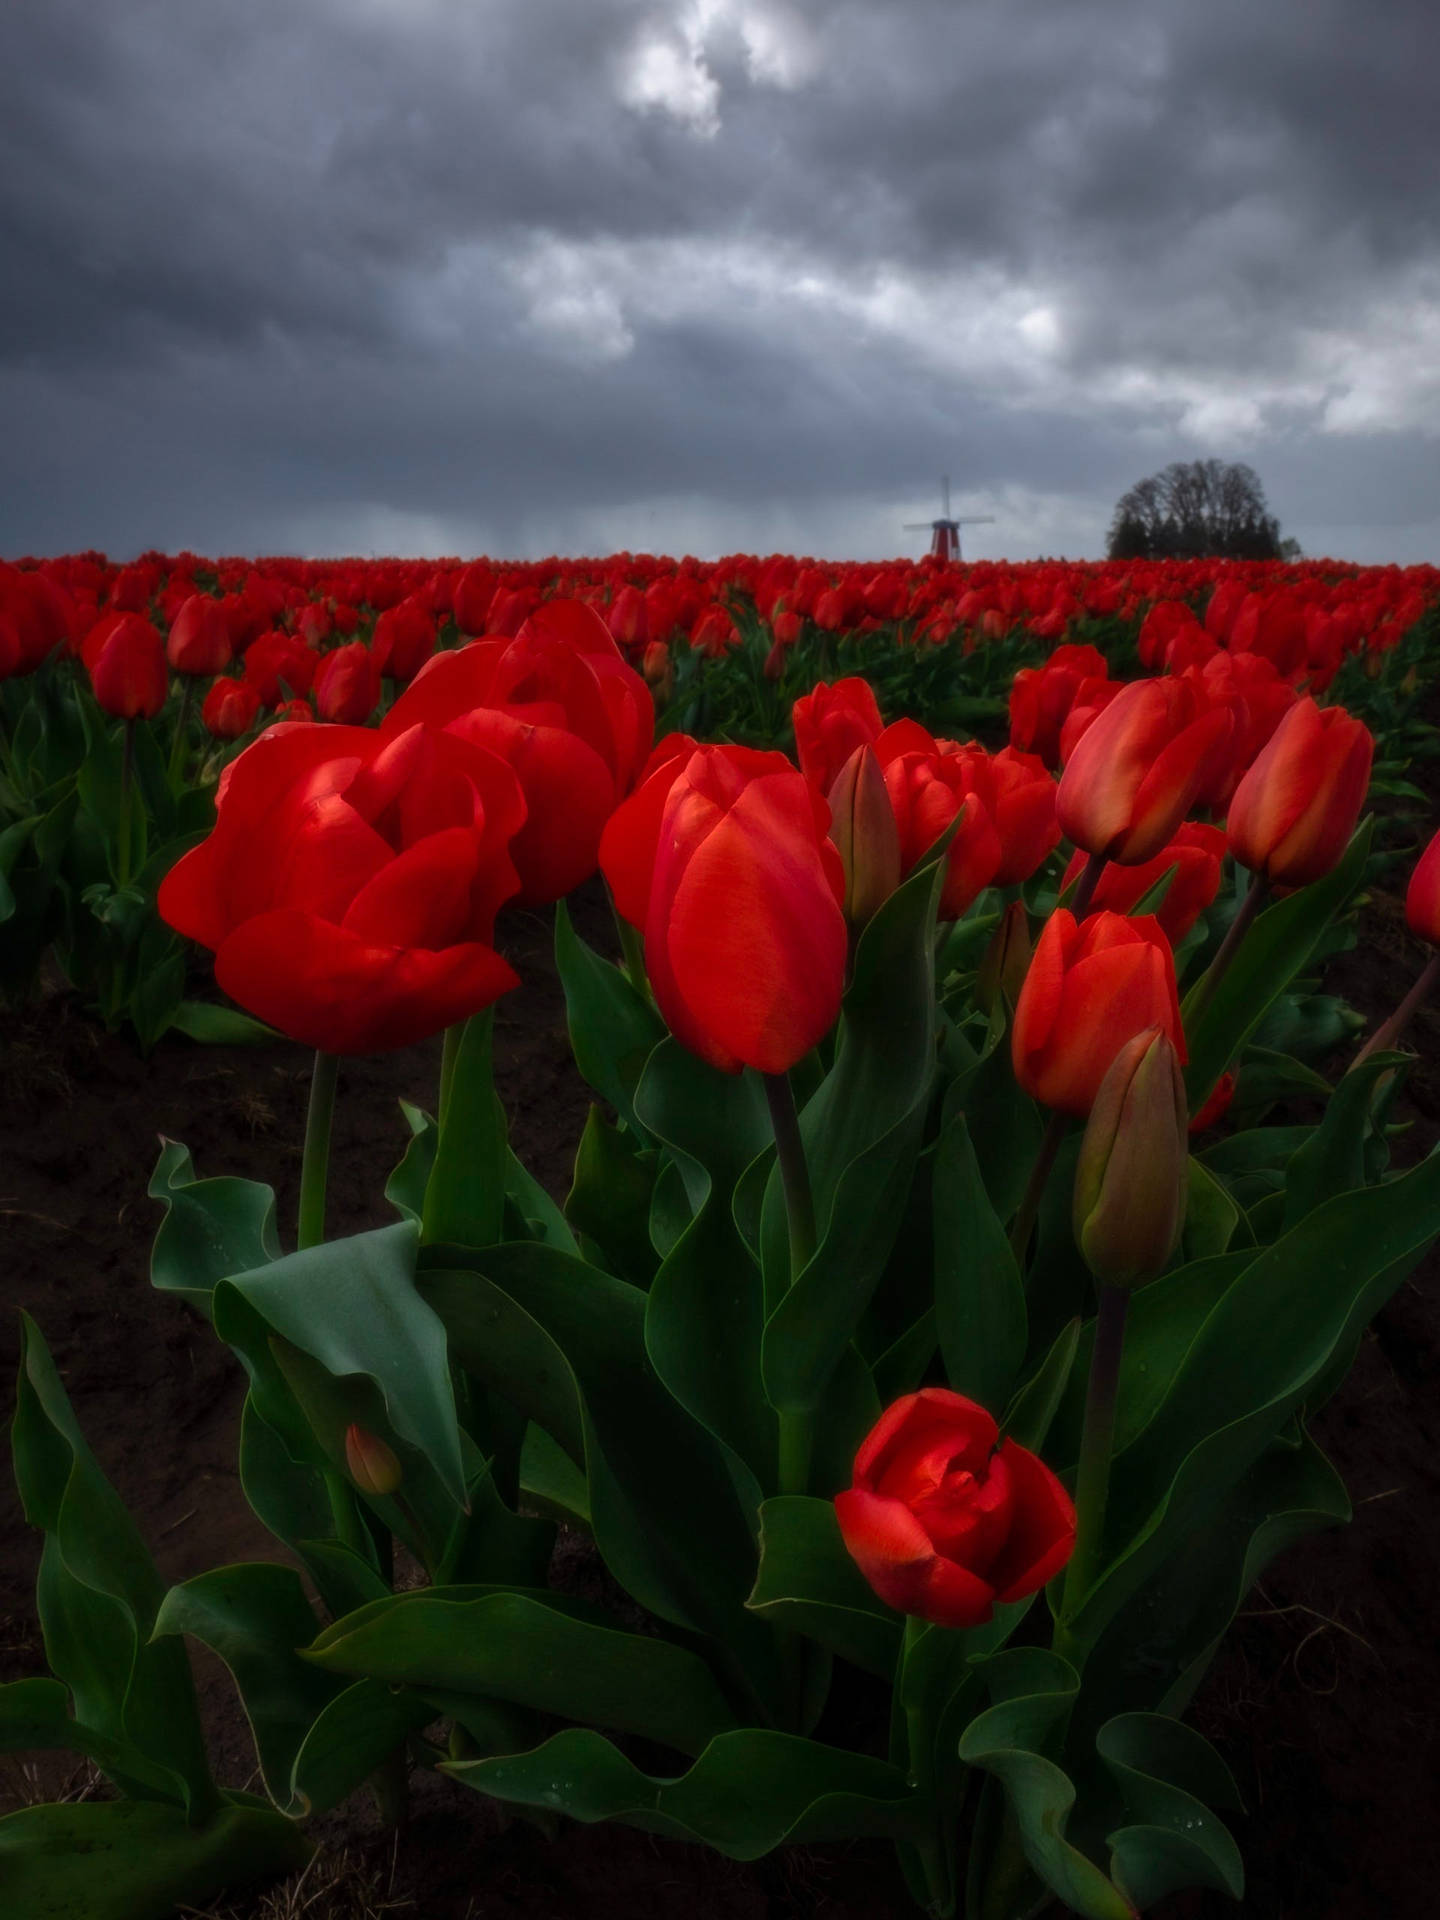 Brighten Up Your Whatsapp Chats With This Stunning Field Of Tulips!